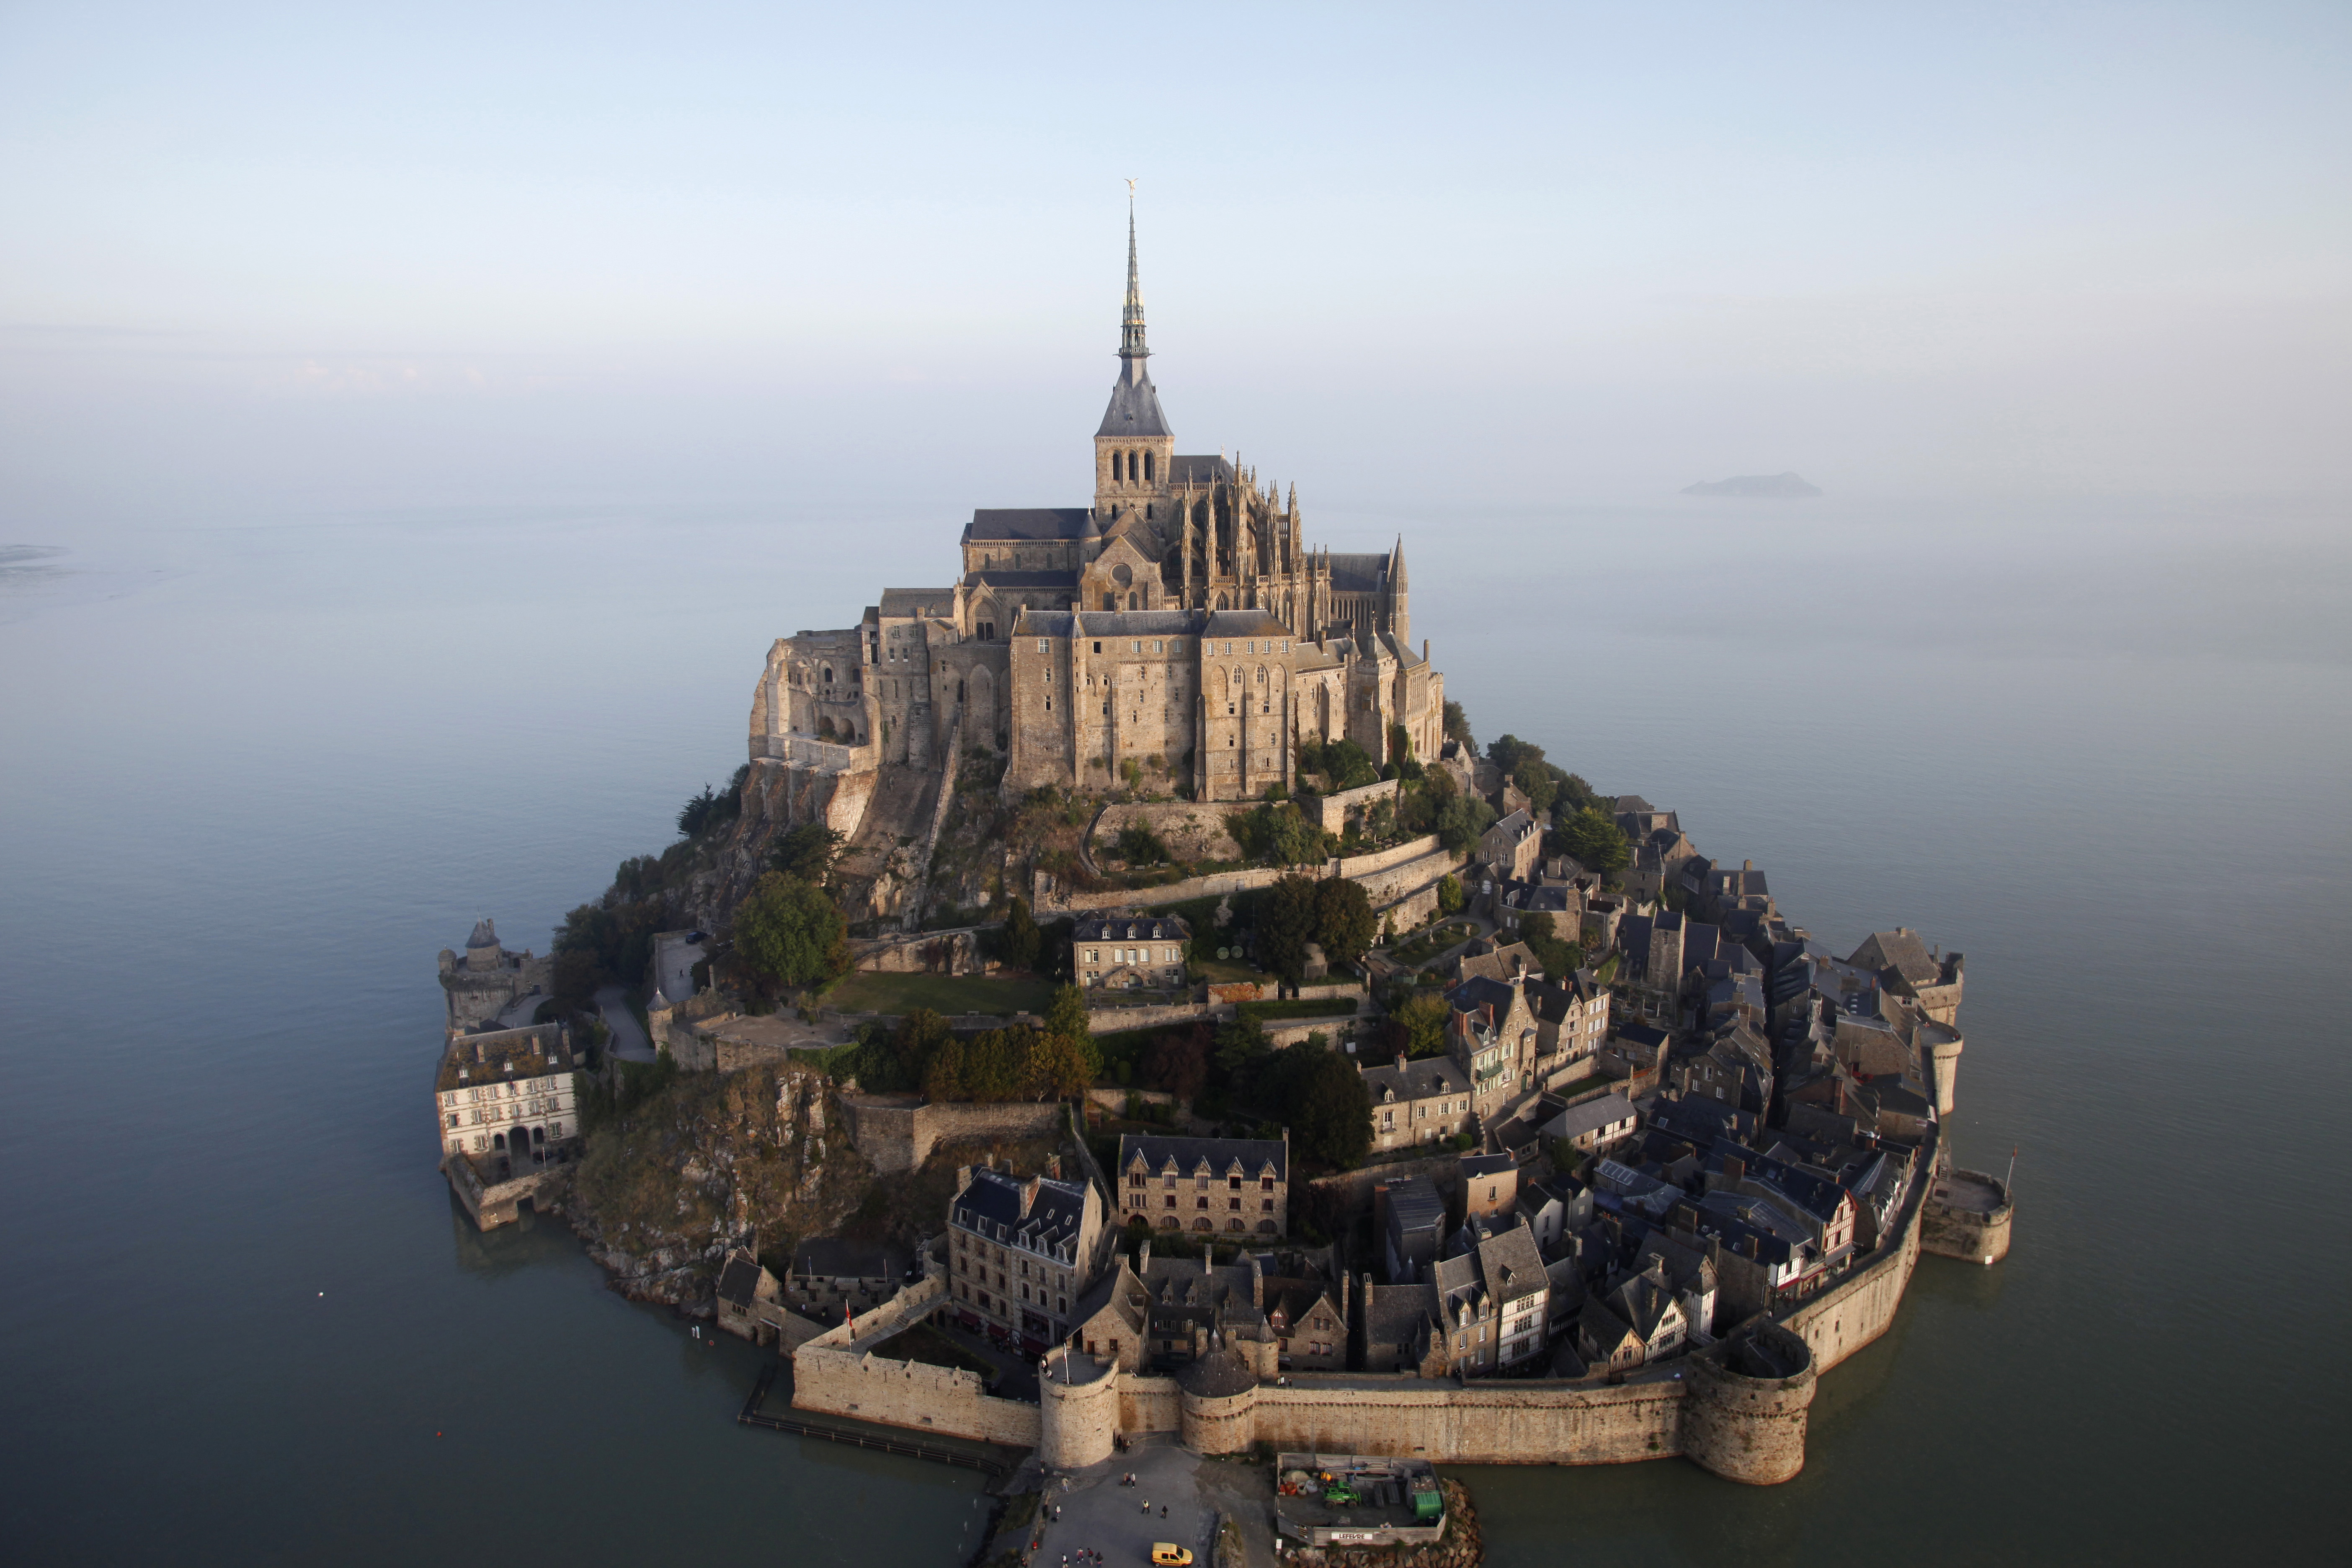 Stand in awe at the UNESCO World Heritage Site, Mont Saint Michel